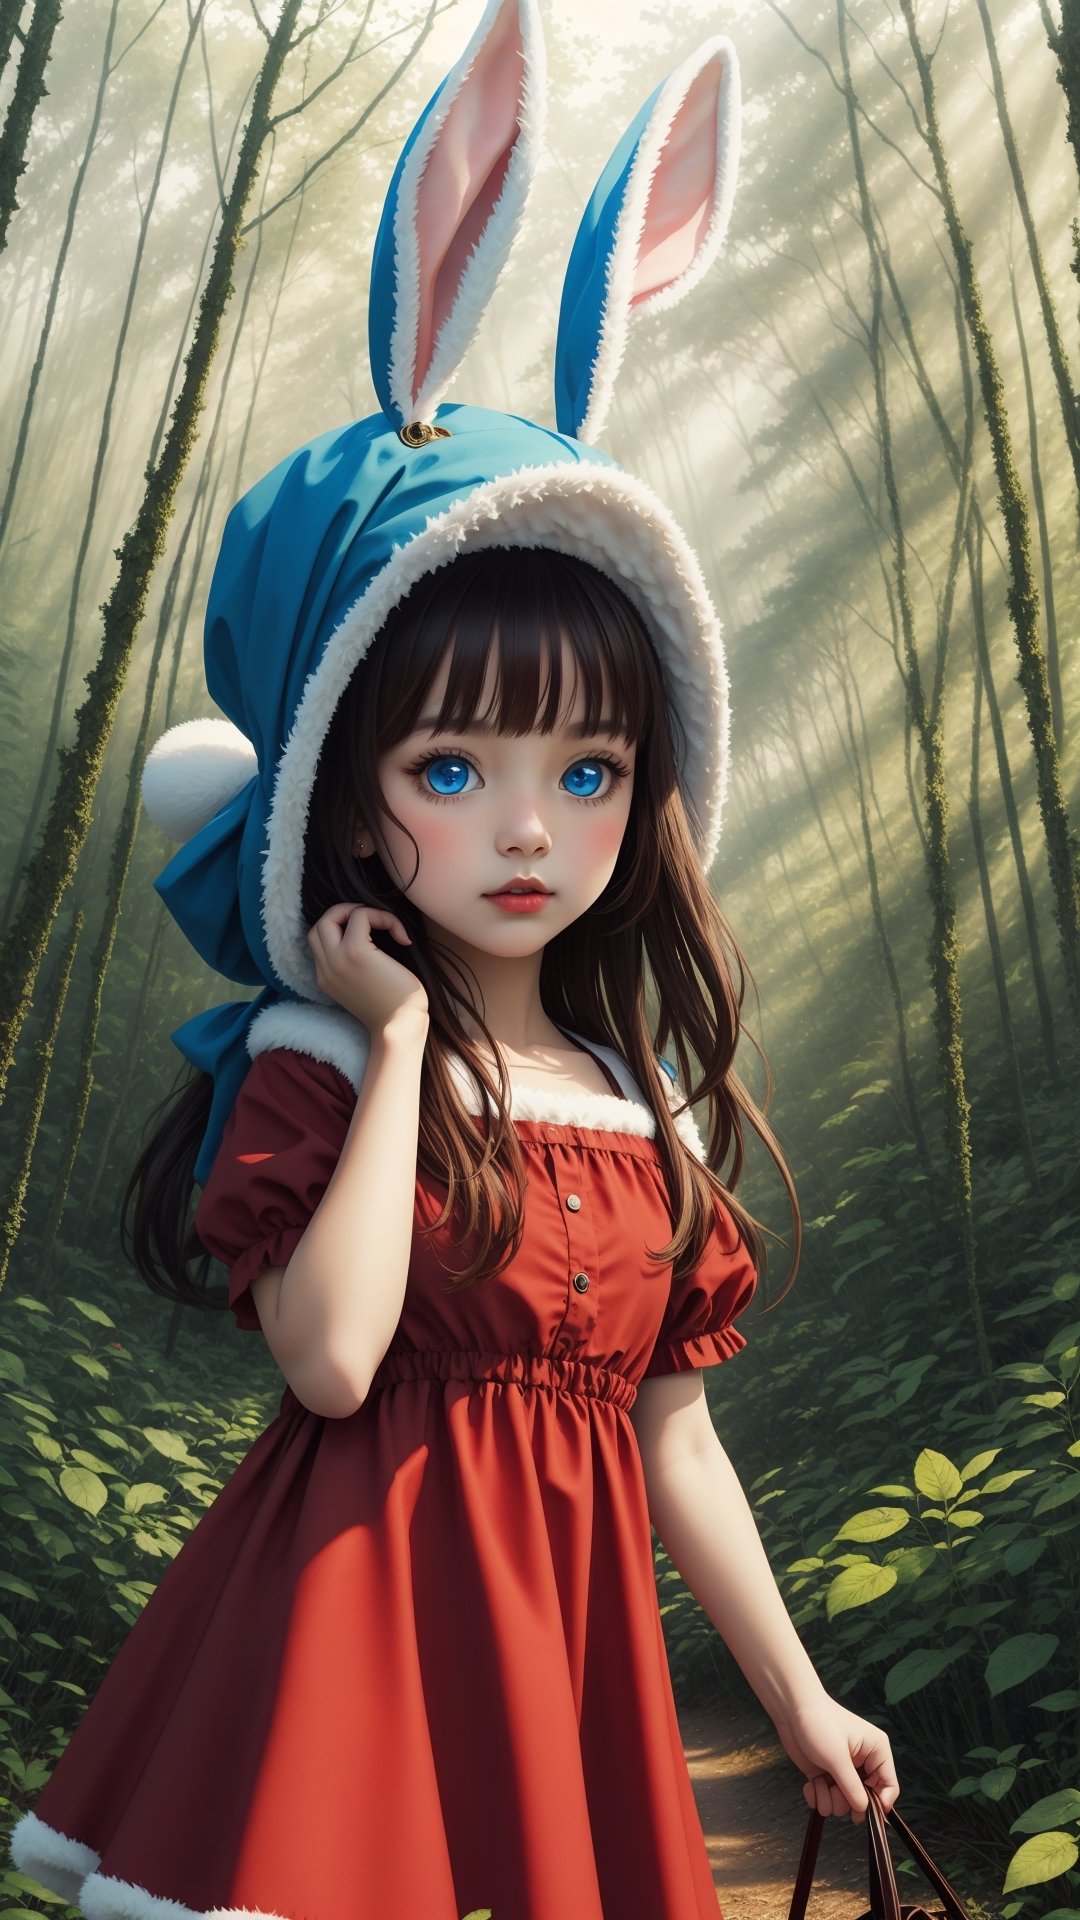 A girl rabbit with big blue eyes and a red dress in a dreamy forest